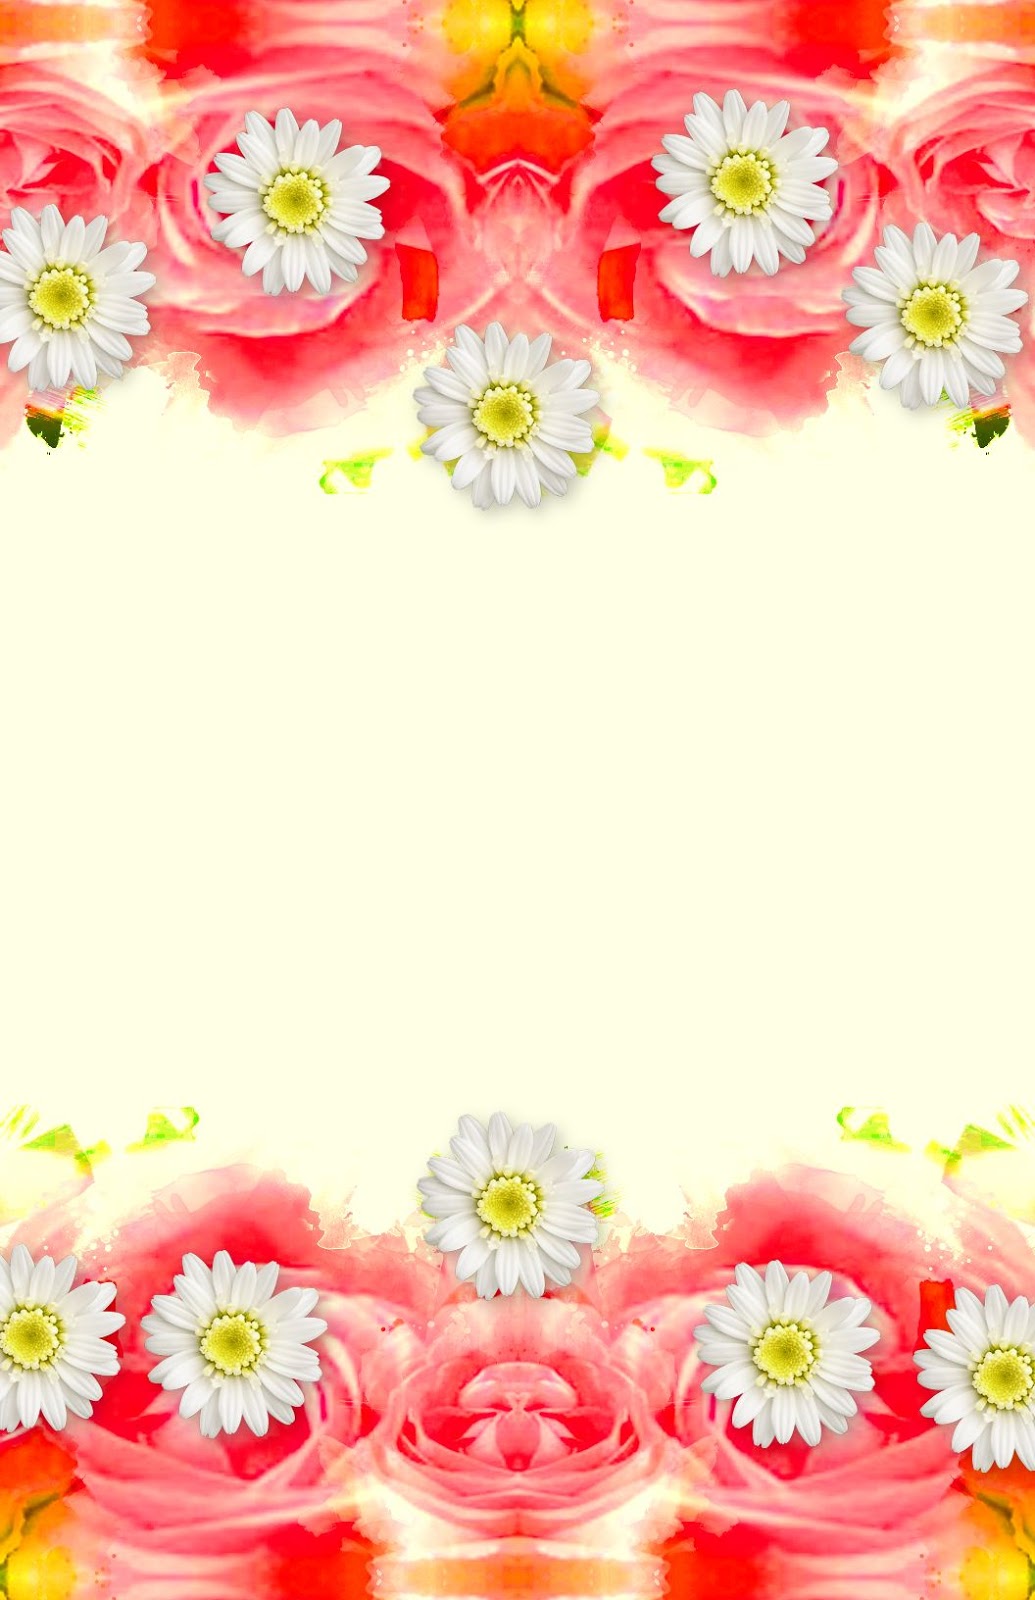 Download Christian Images In My Treasure Box: Flower Borders ...